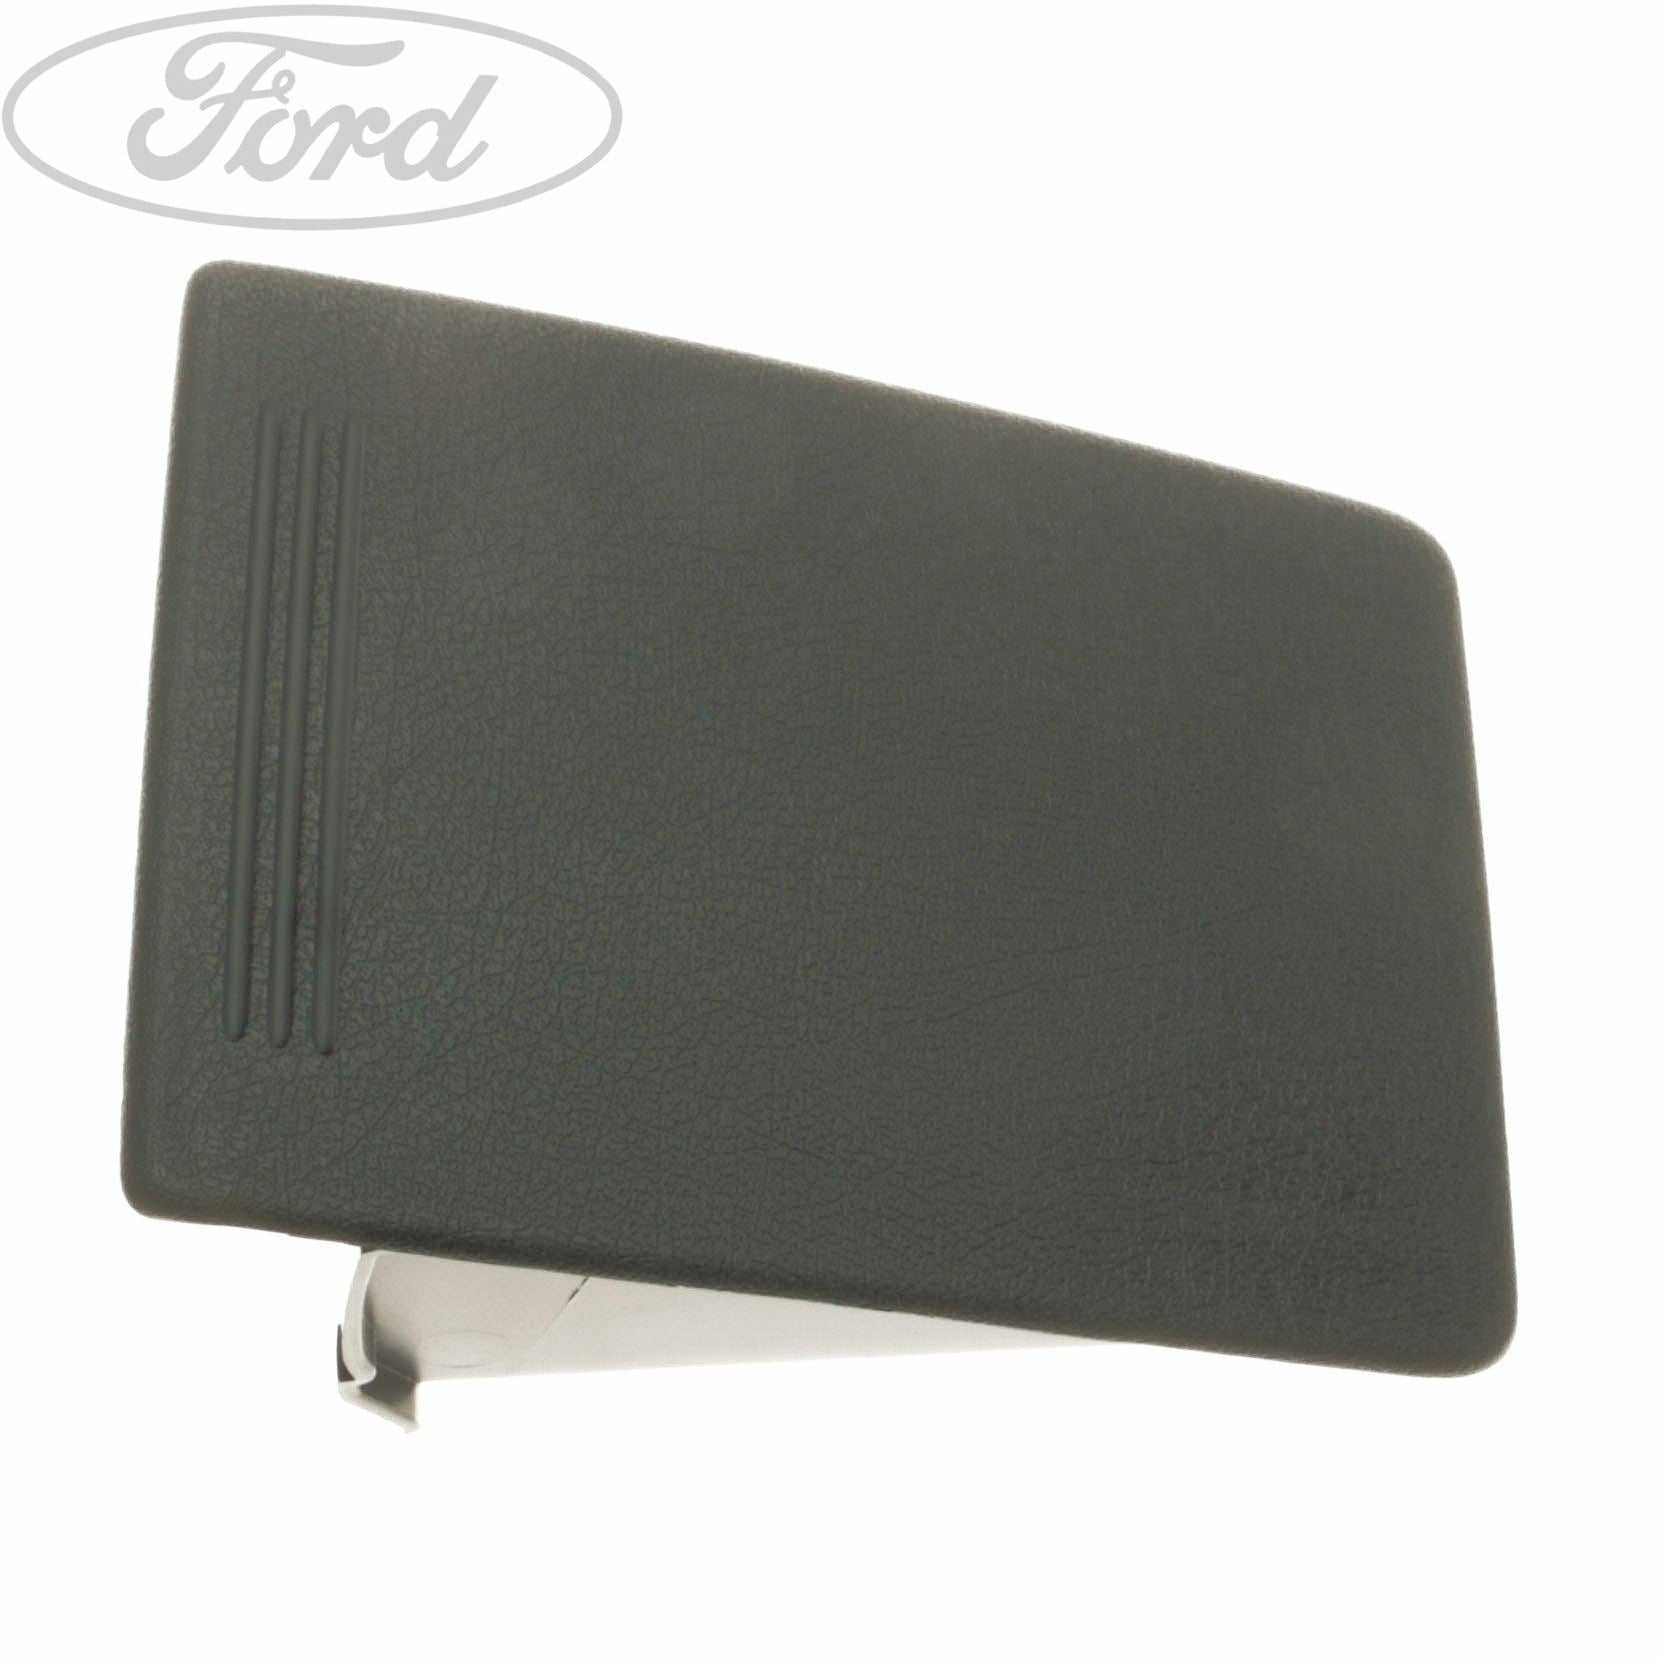 Ford, STOWAGE BOX DOOR